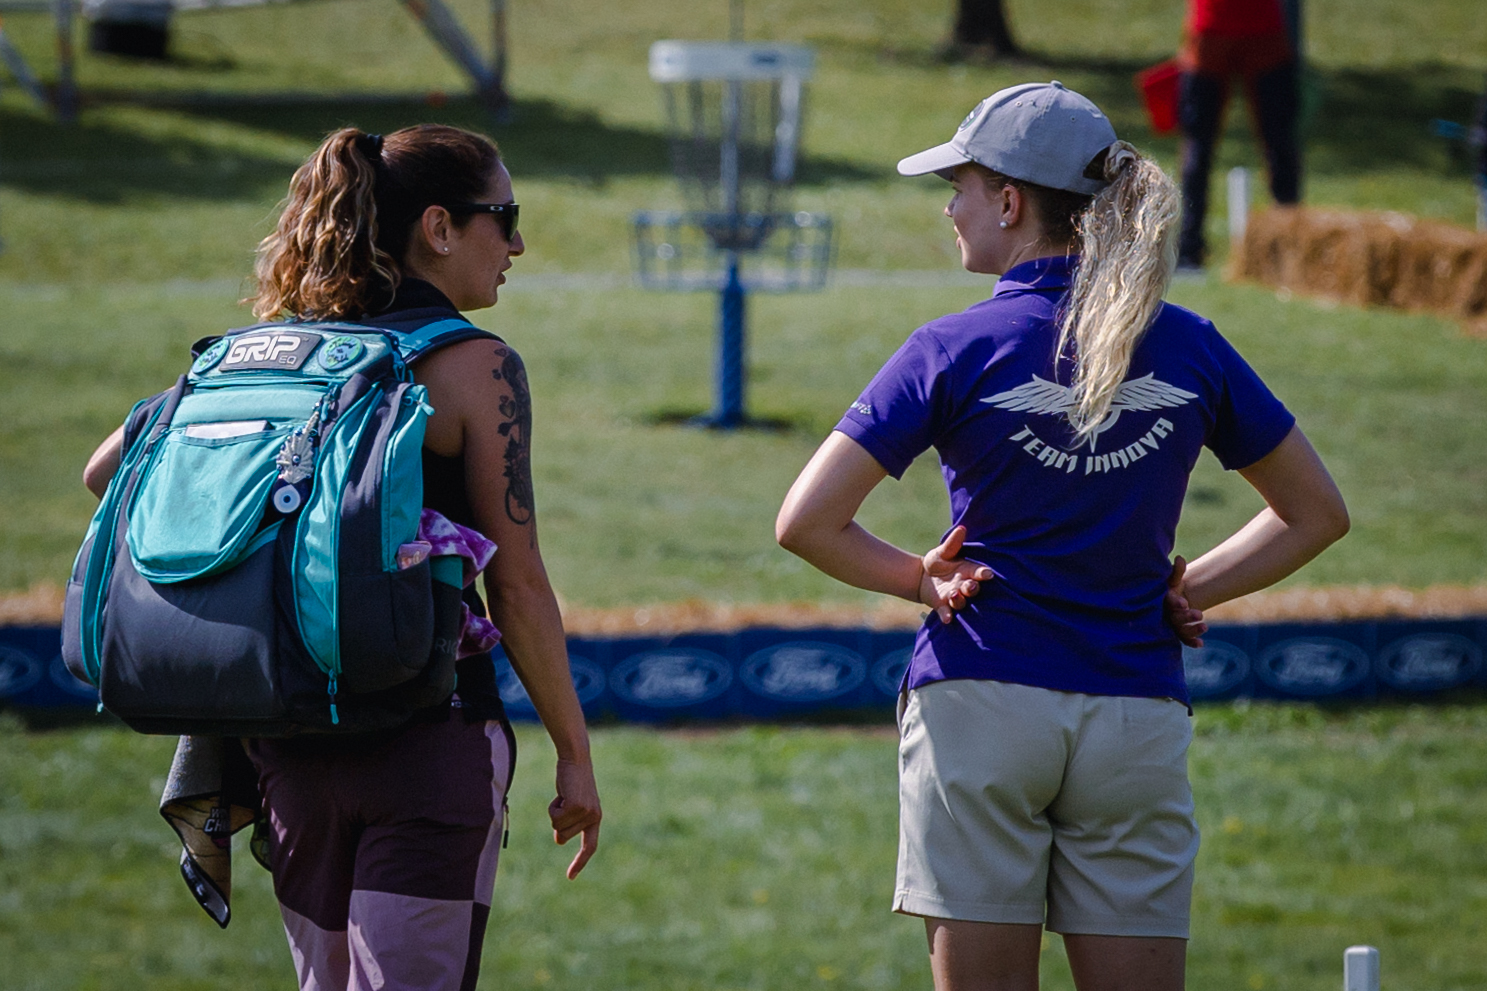 Team GRIPeq member, Jessica Weese, talks with another disc golfer while wearing her GRIPeq bag.